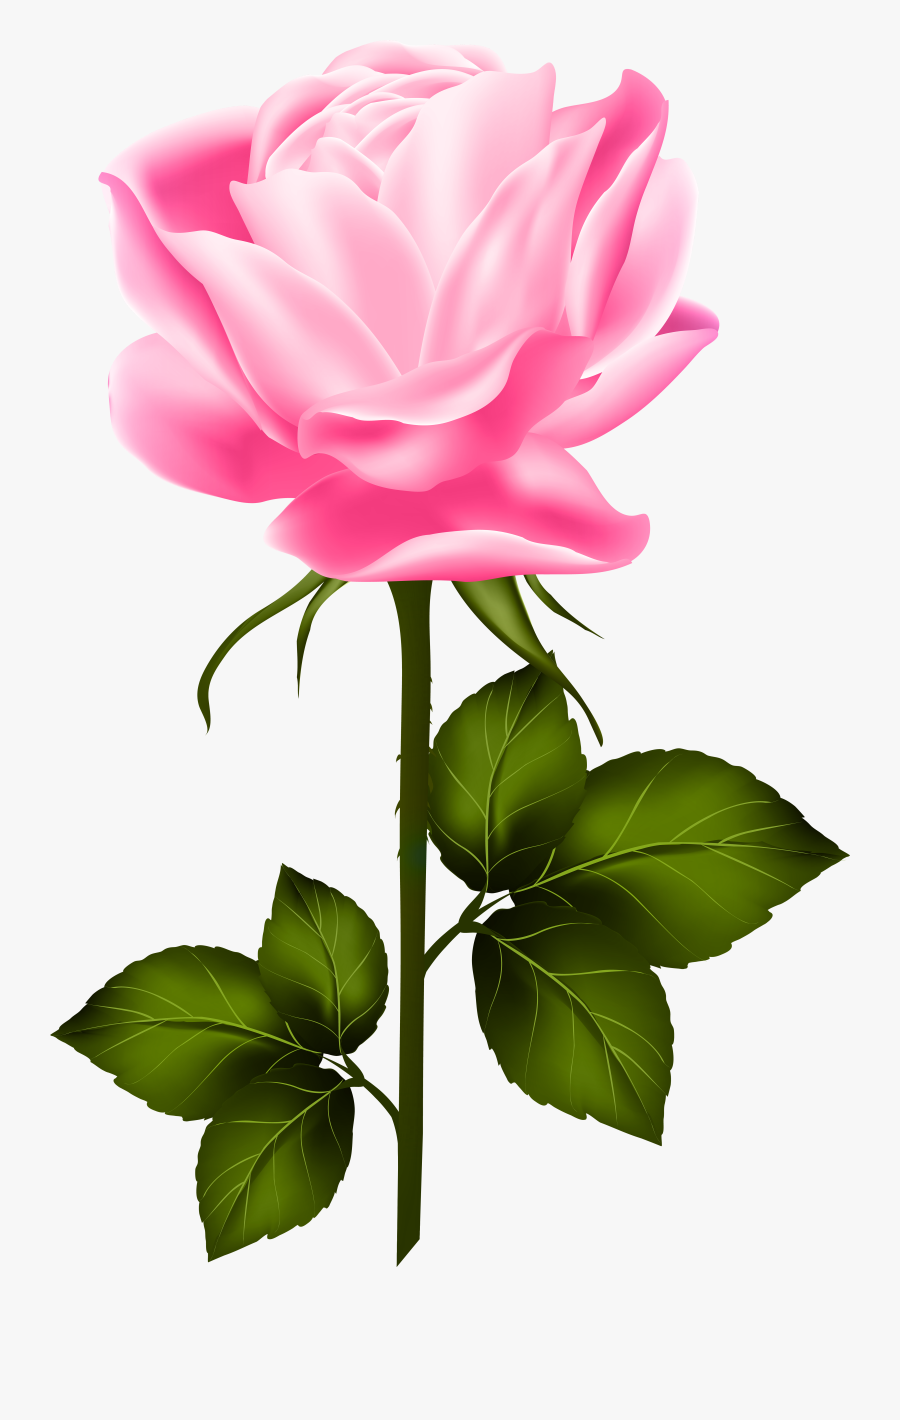 Pink With Stem Png - Purple Rose With Stem, Transparent Clipart